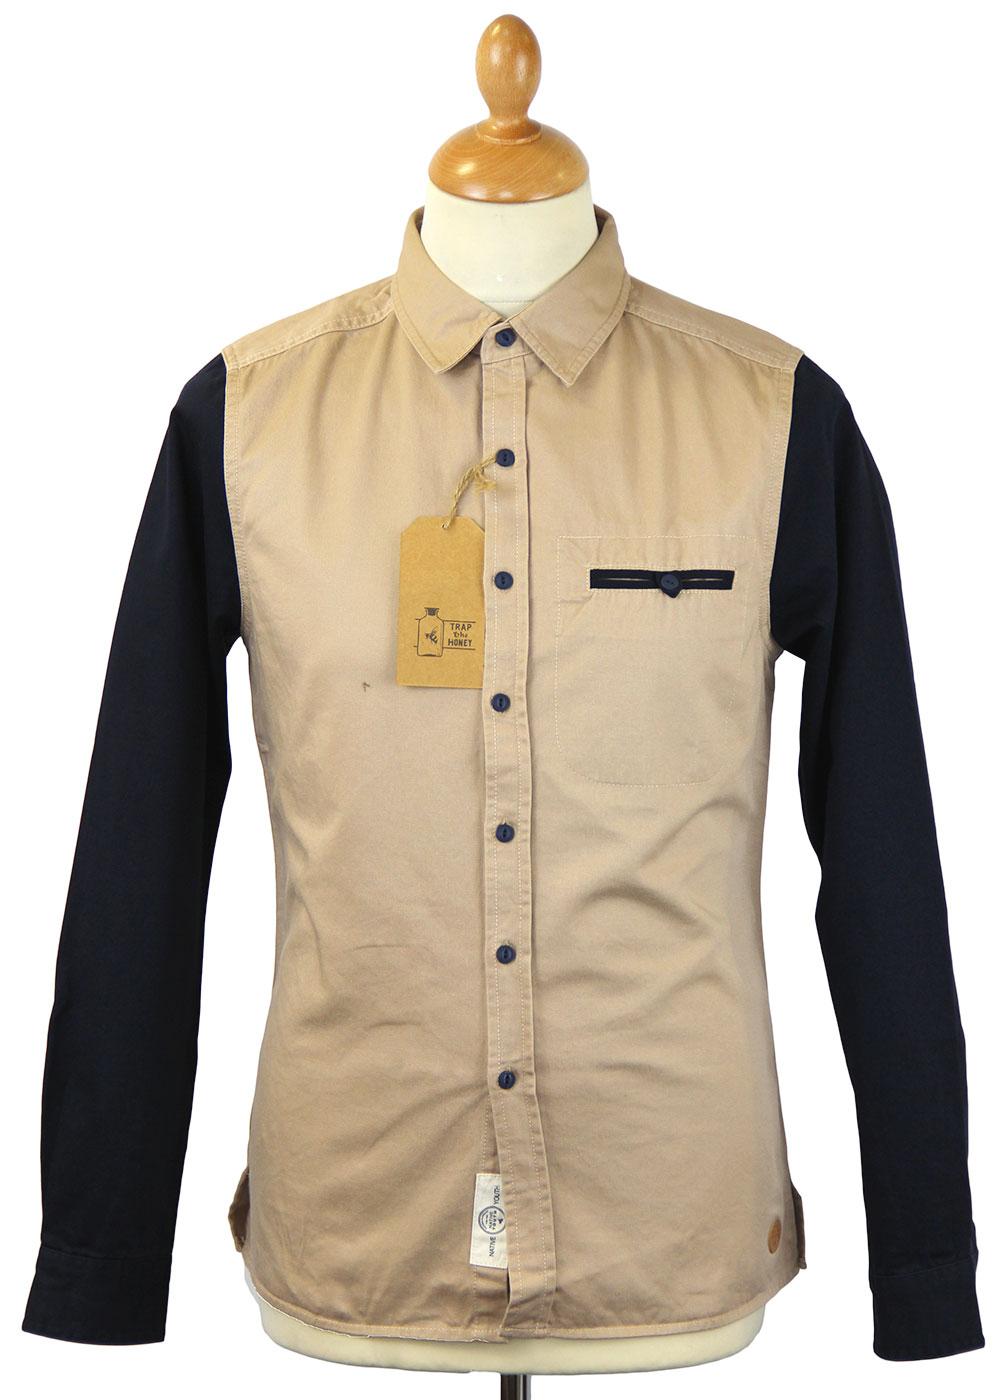 Contrast Sleeve NATIVE YOUTH Retro Worker Shirt